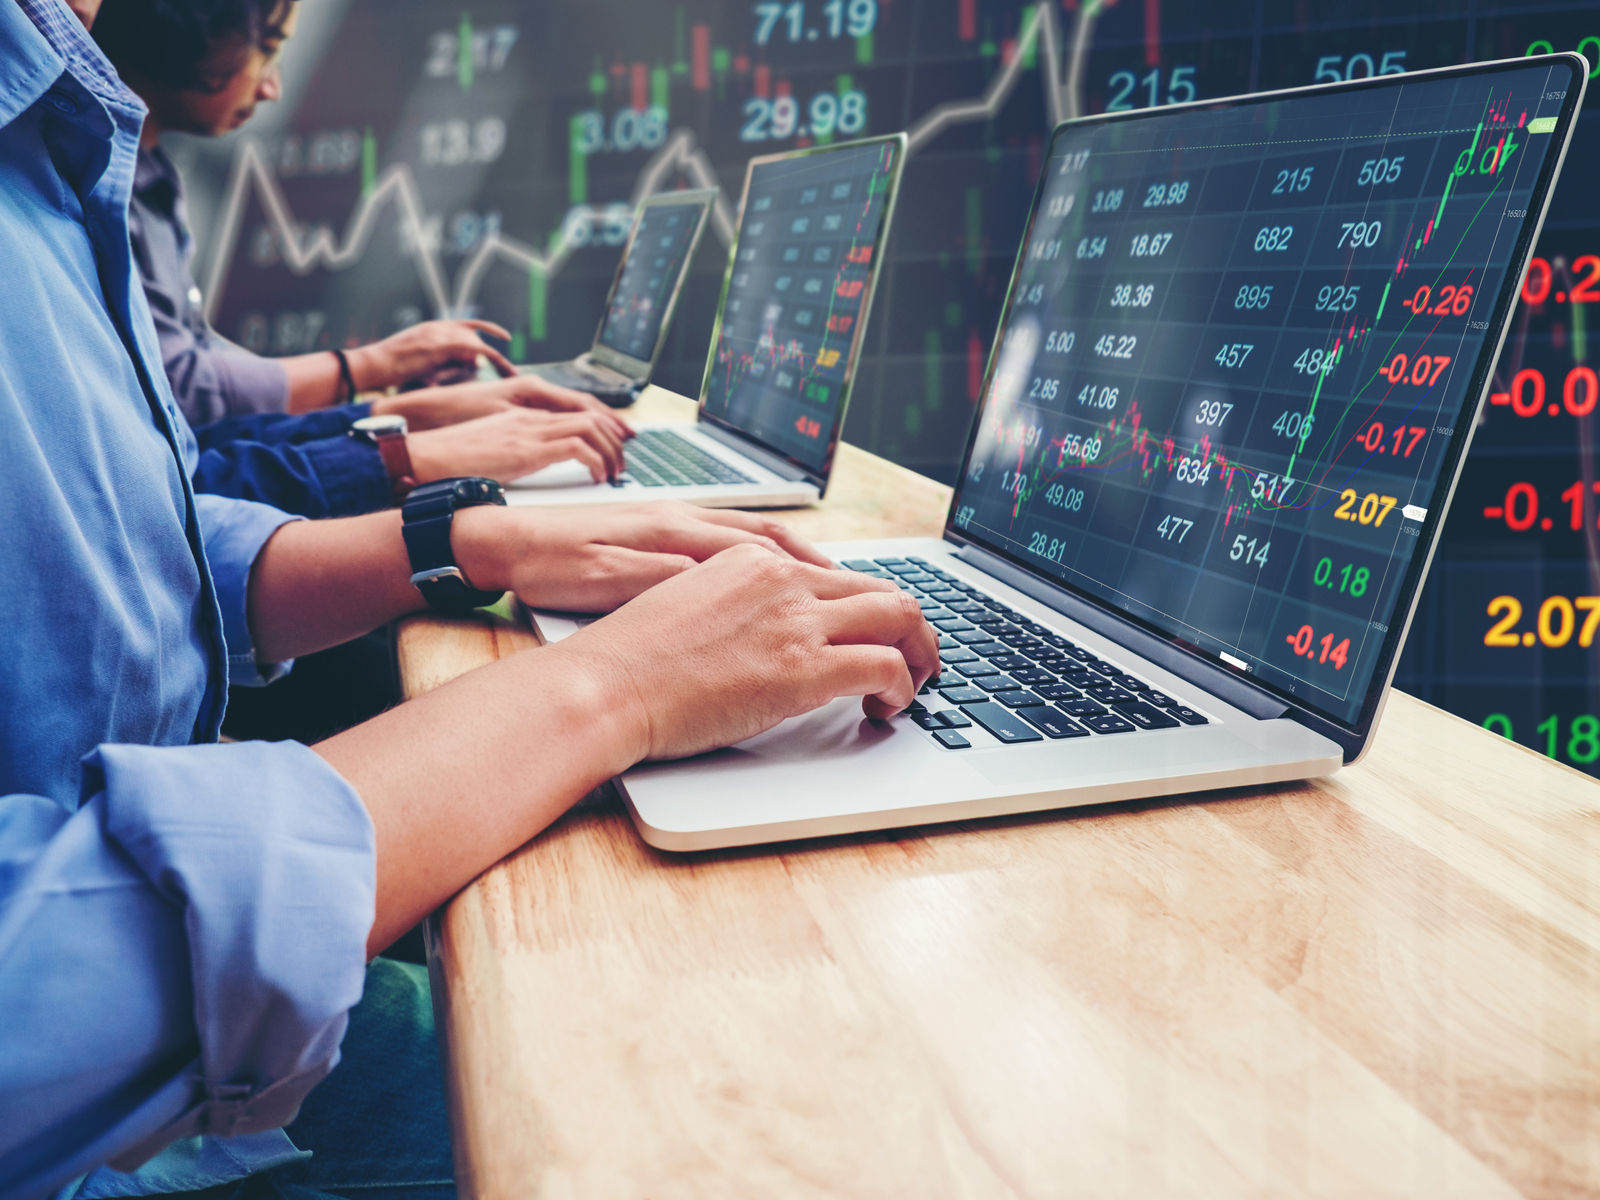 Survey: Nearly Half of Millennial Traders Have More Faith in Crypto Than Stock Market due to 'Generational Shift'